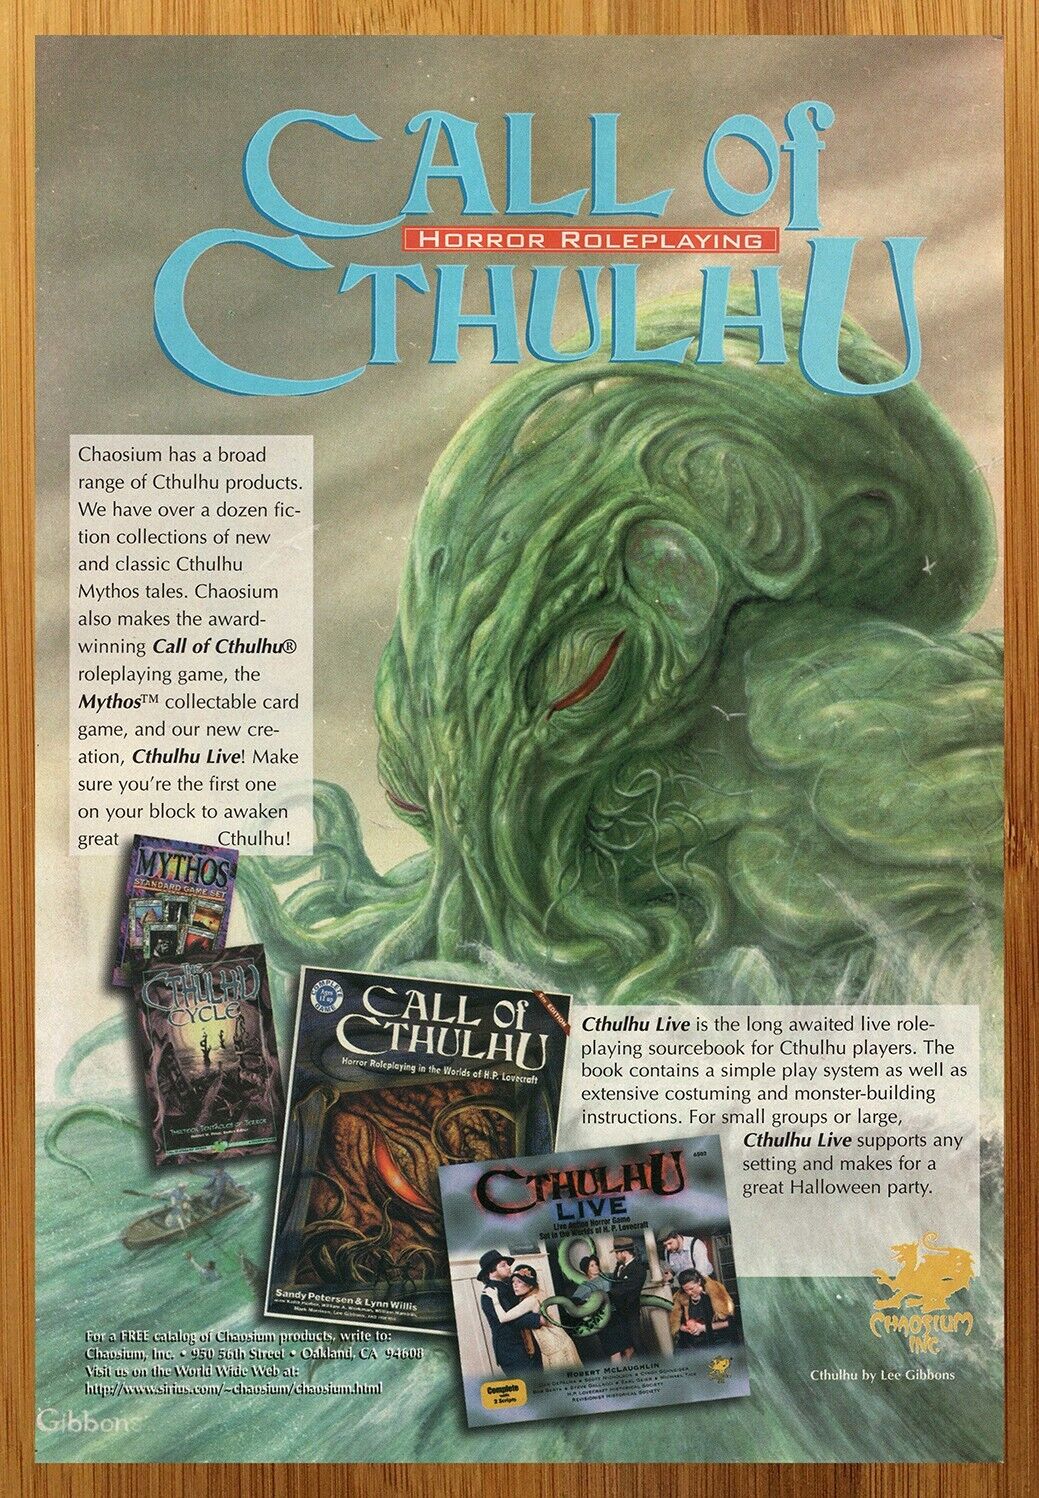 1997 Call of Cthulhu Role-Playing Game Print Ad/Poster Lovecraft Mythos CCG Art